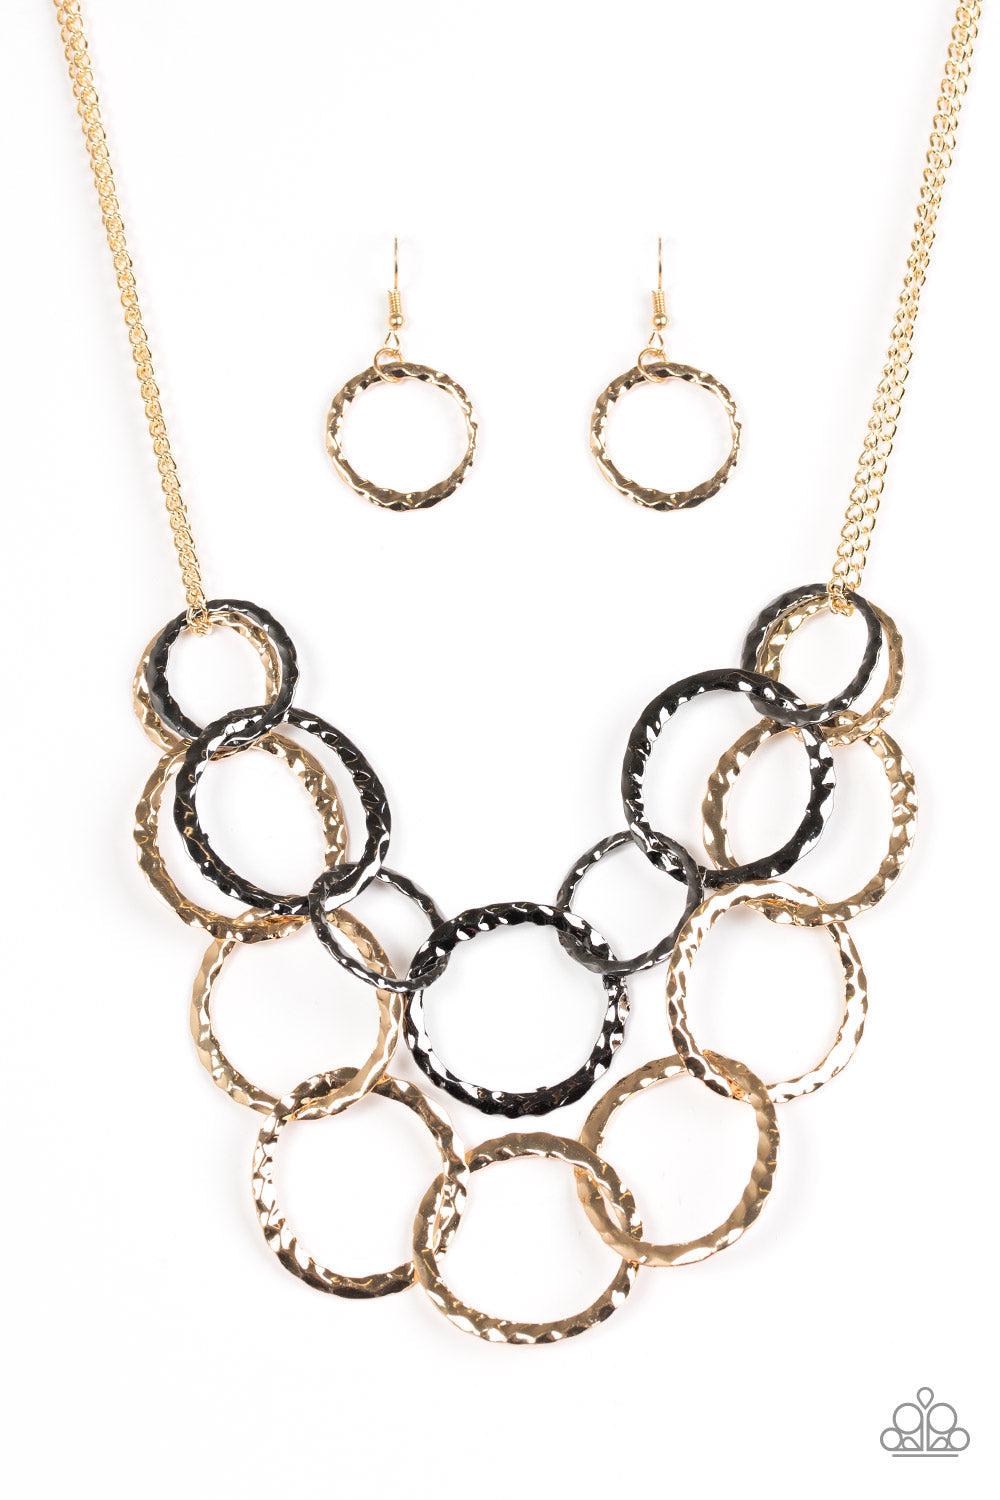 Radiant Ringmaster Multi Gold & Gunmetal Necklace - Paparazzi Accessories- lightbox - CarasShop.com - $5 Jewelry by Cara Jewels